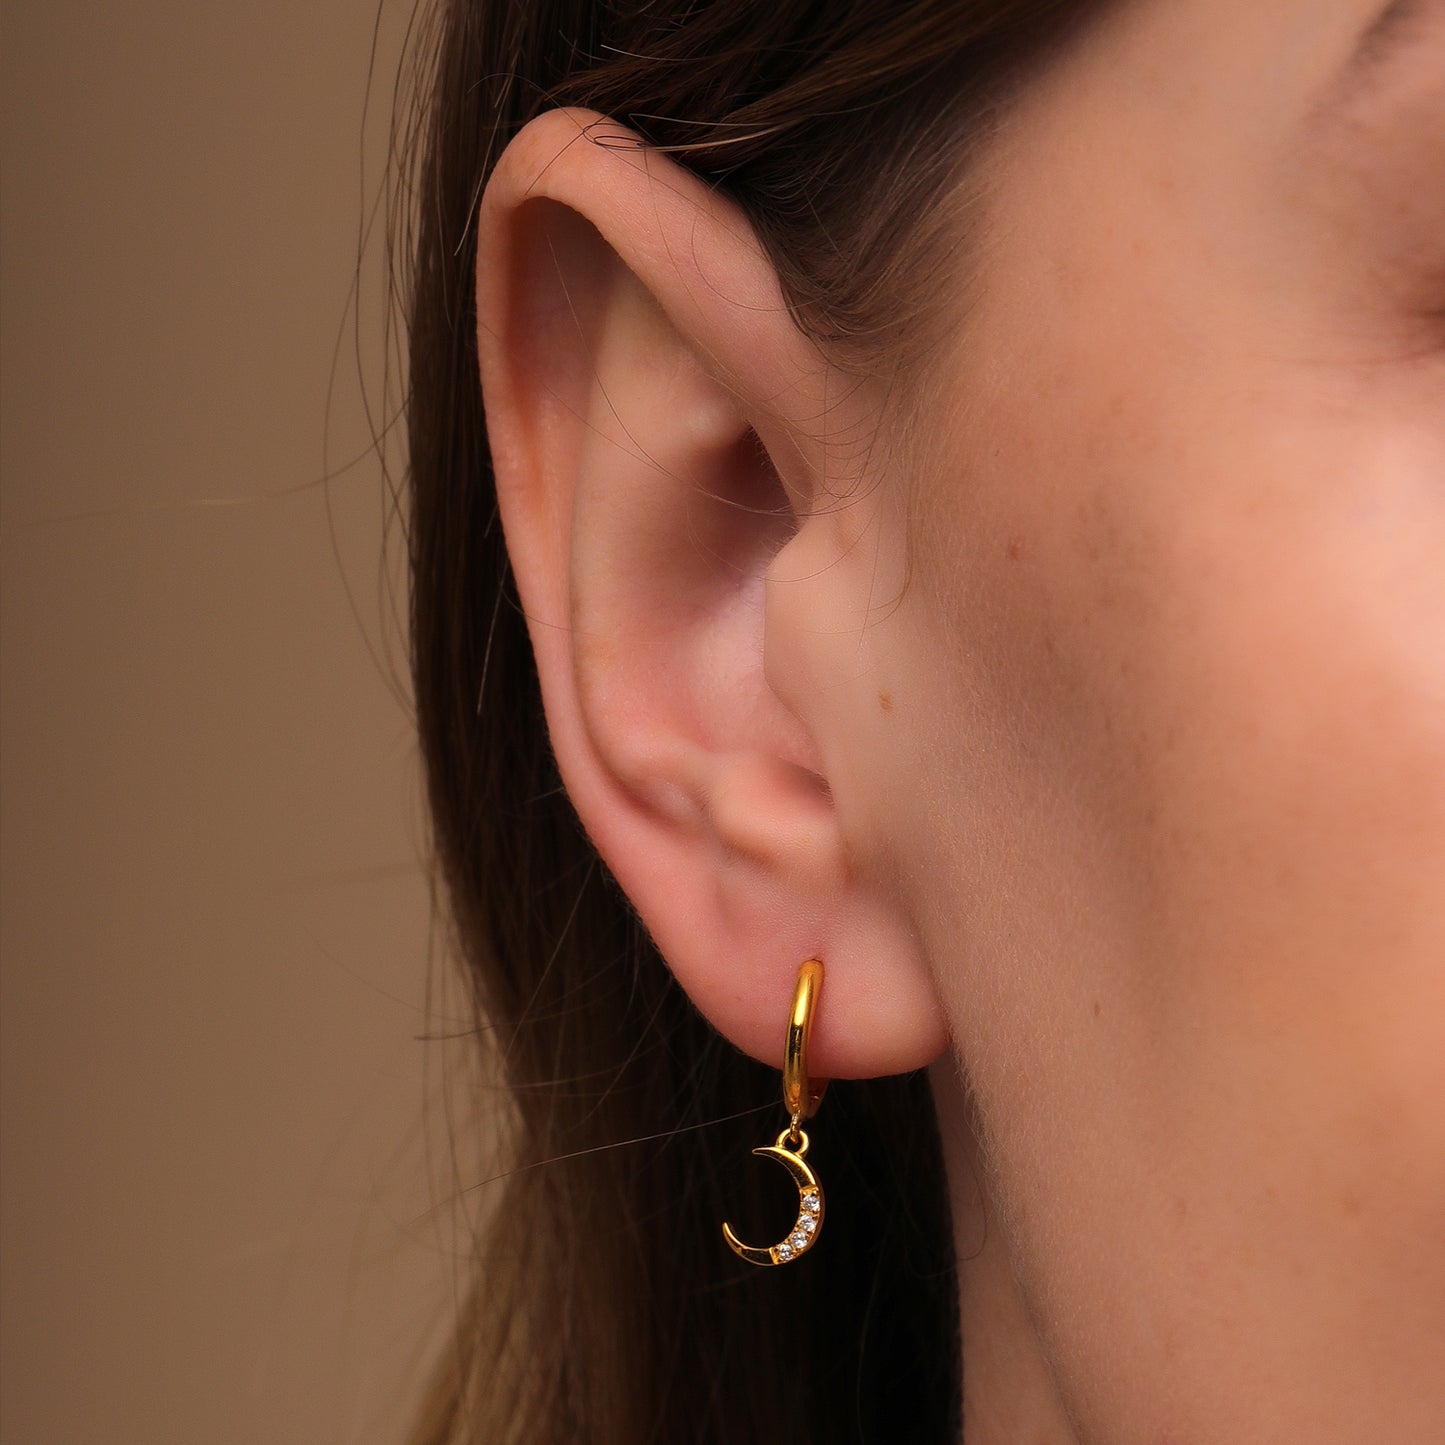 Experience the mesmerizing interplay of day and night with Esther's sun and moon-adorned hoop earrings.